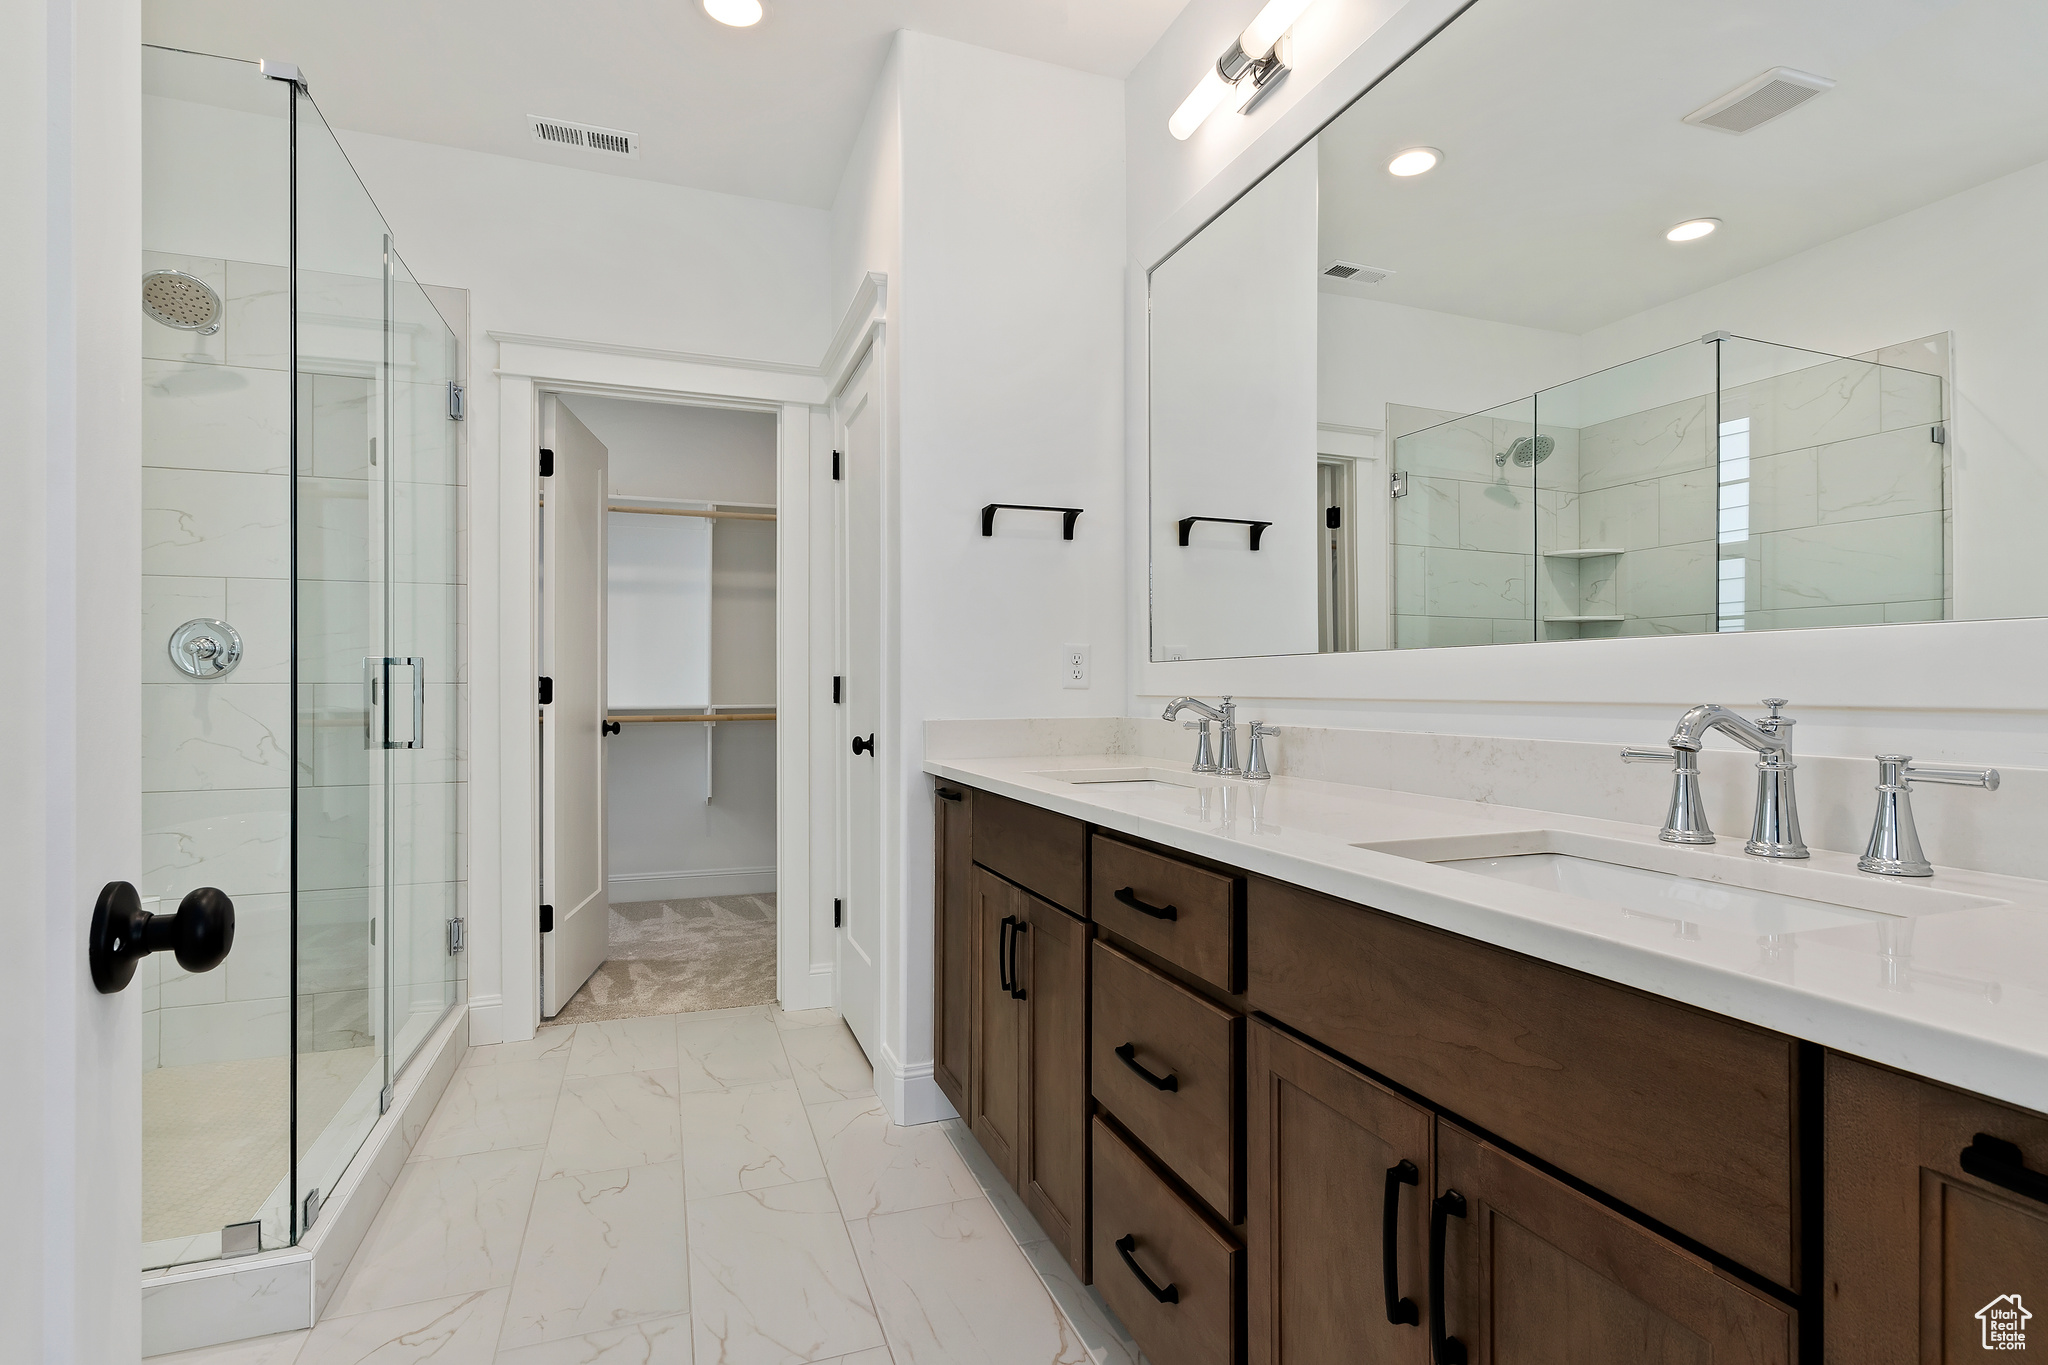 Master bathroom with heated tile floors, dual sinks, euro glass shower and 6' freestanding tub